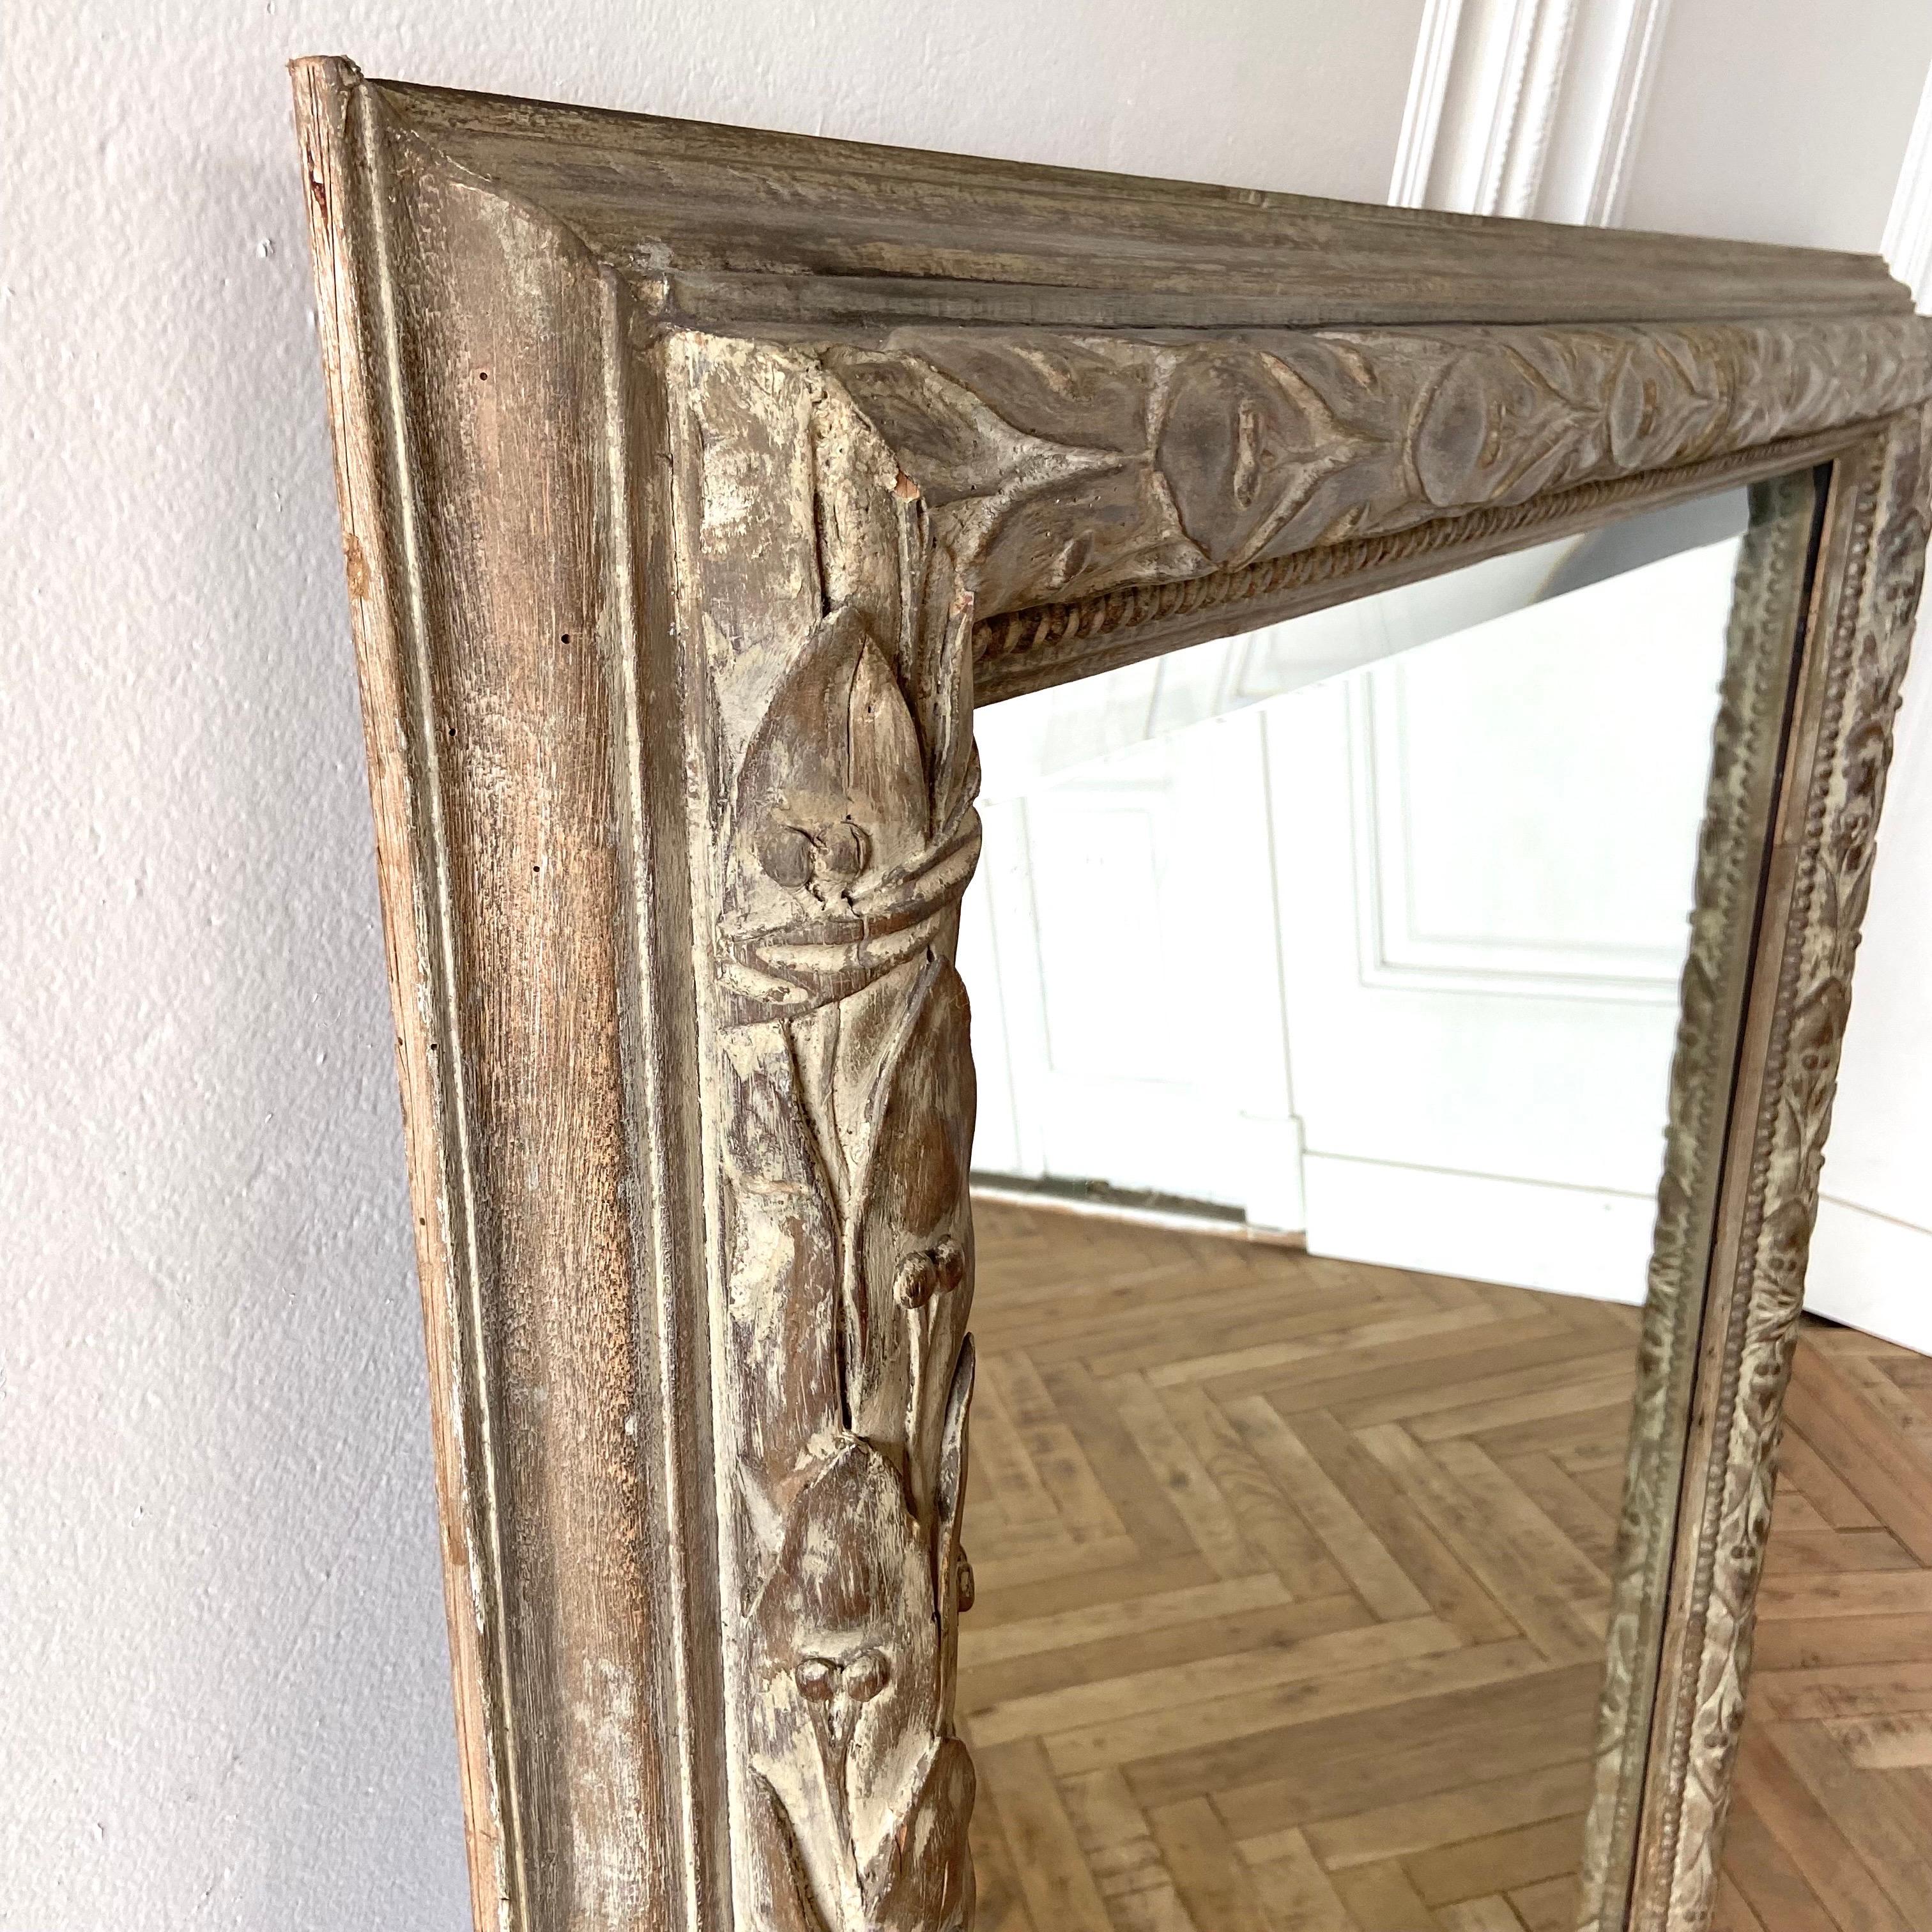 Vintage Italian gilt wood mirror that has a faded stripped finish.
Raw natural wood with remnants of bole and gilt leaving a natural raw patina.
Size of Mirror 52” width x 59” height and 3